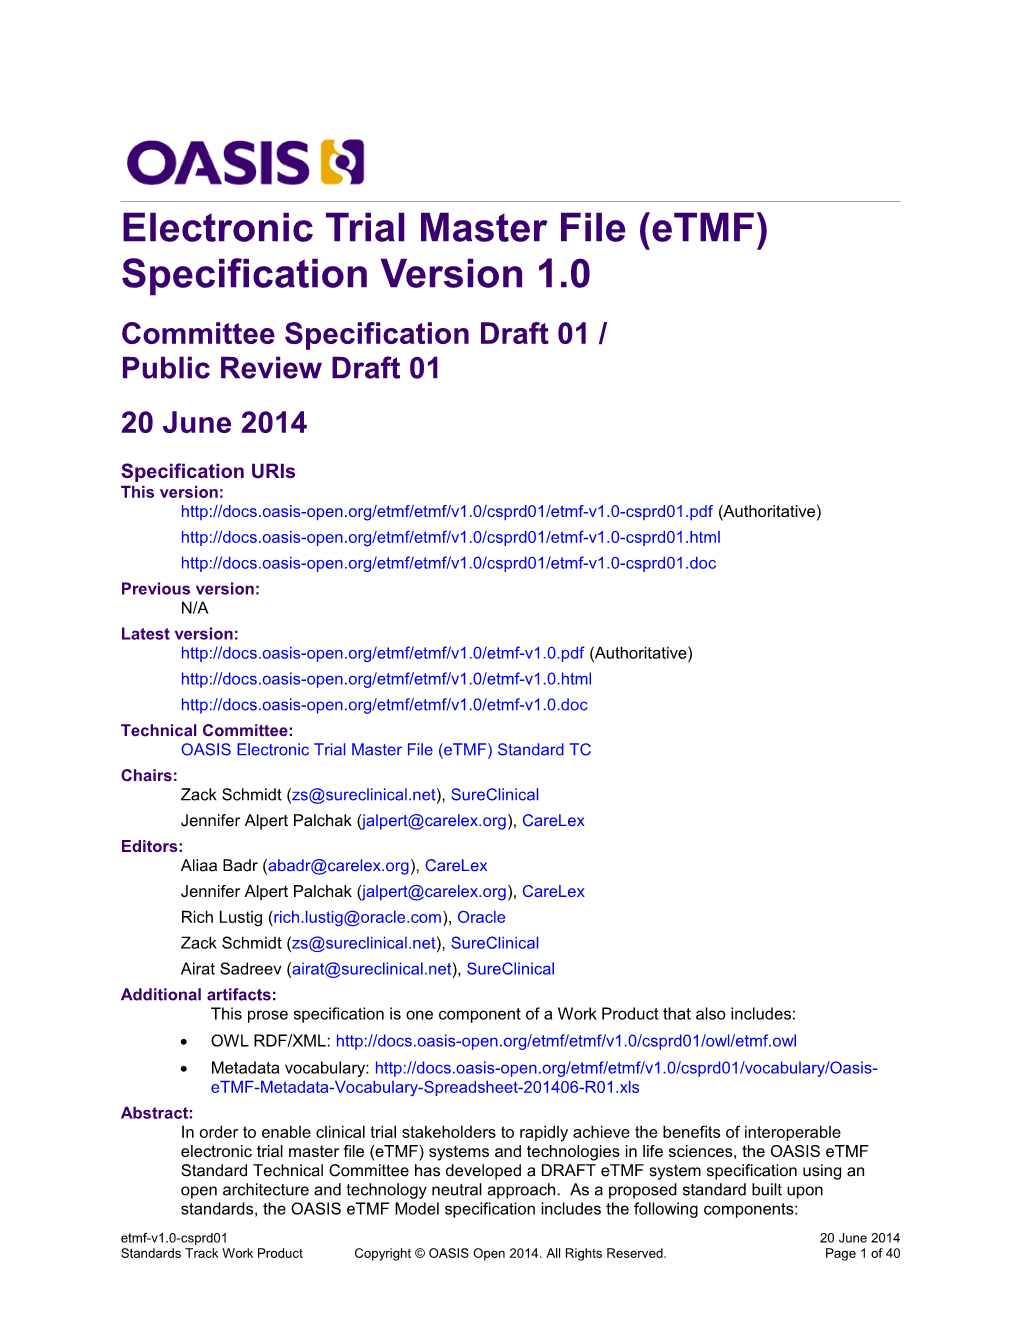 Electronic Trial Master File (Etmf) Specification Version 1.0